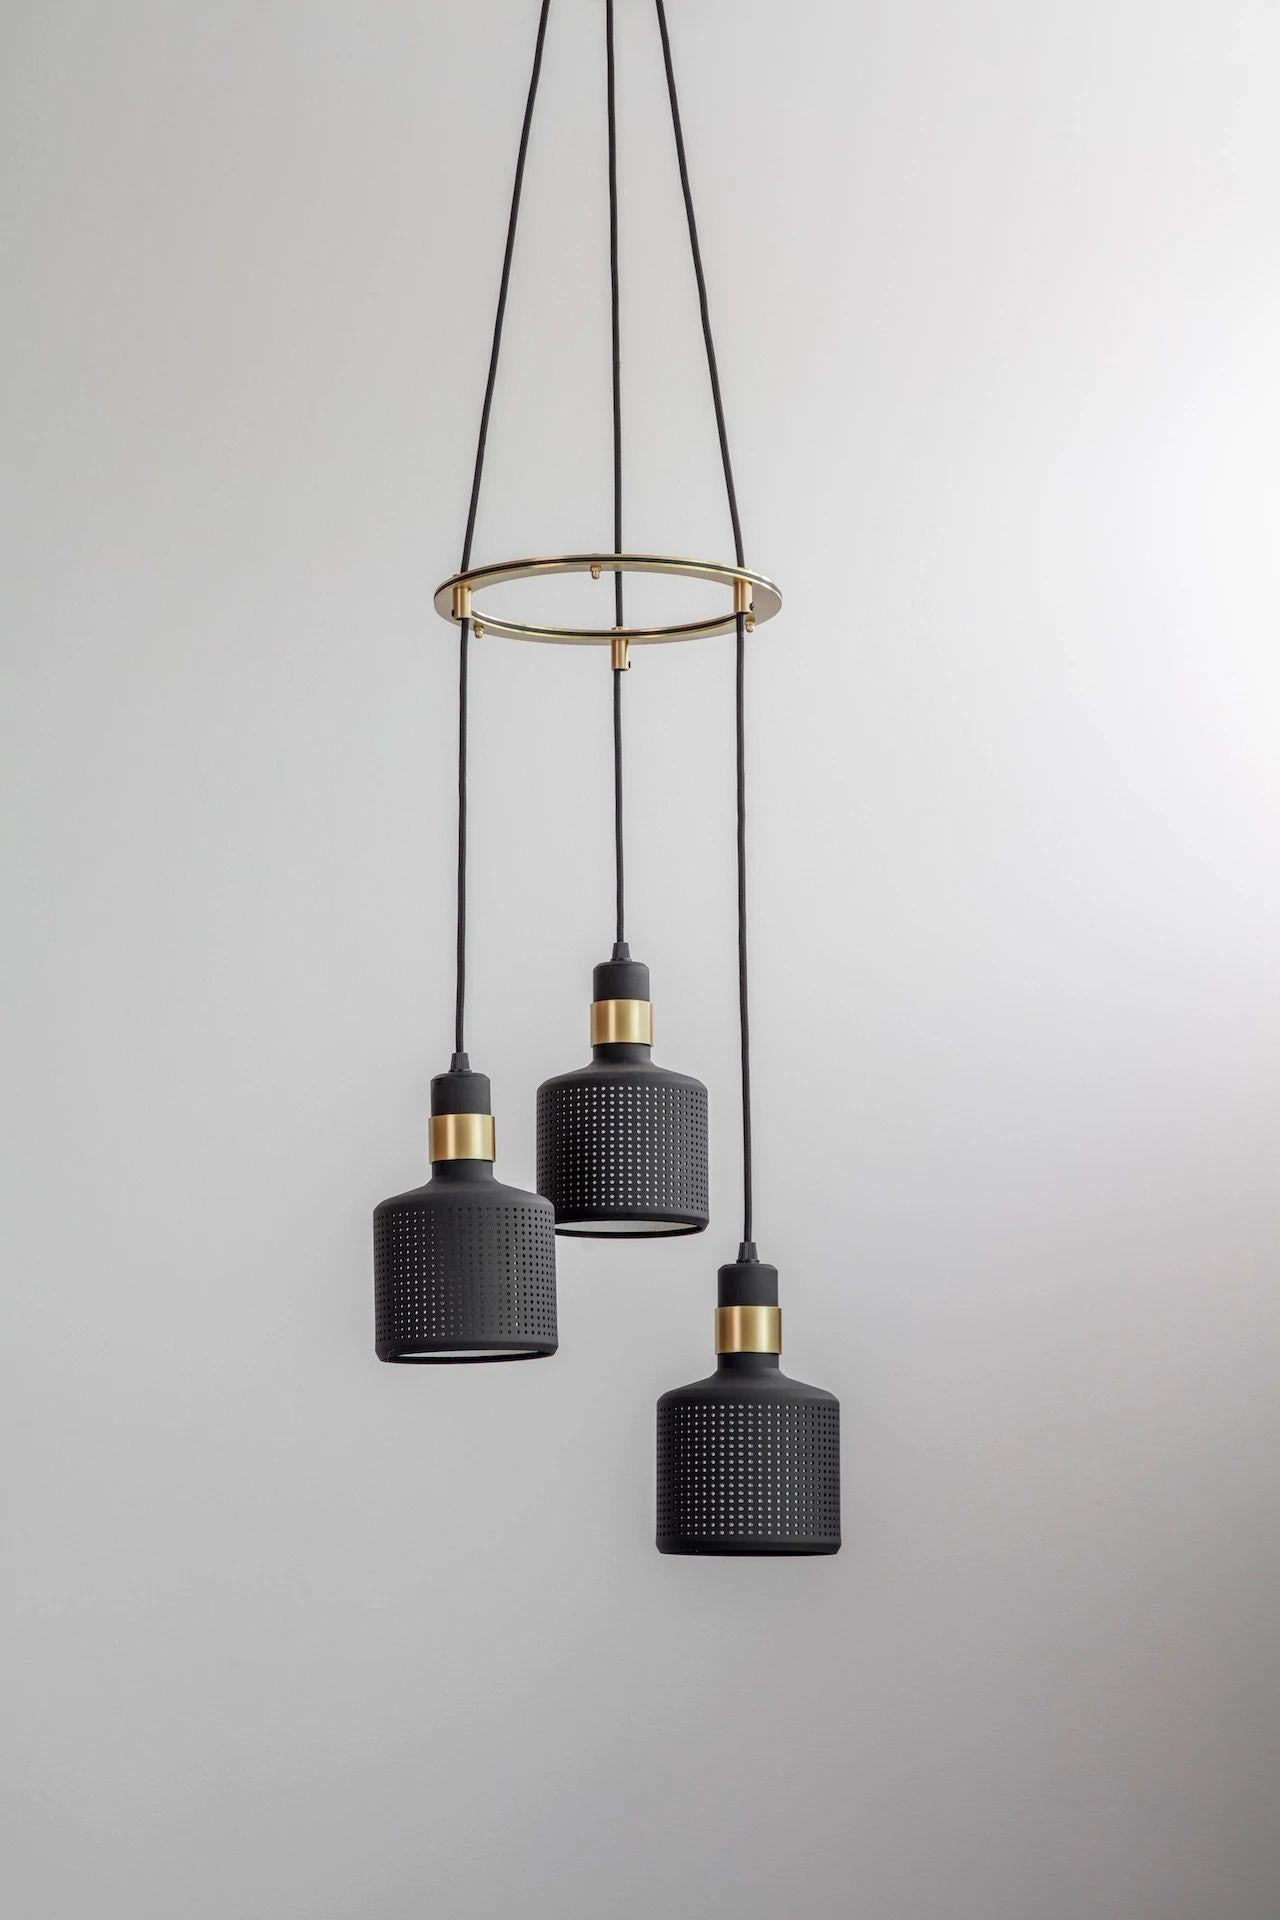 Black riddle cluster light 3 by Bert Frank
Dimensions: H 20 x W 12 x D 12 cm
Materials: brass and steel

Available finishes: brass and black
All our lamps can be wired according to each country. If sold to the USA it will be wired for the USA